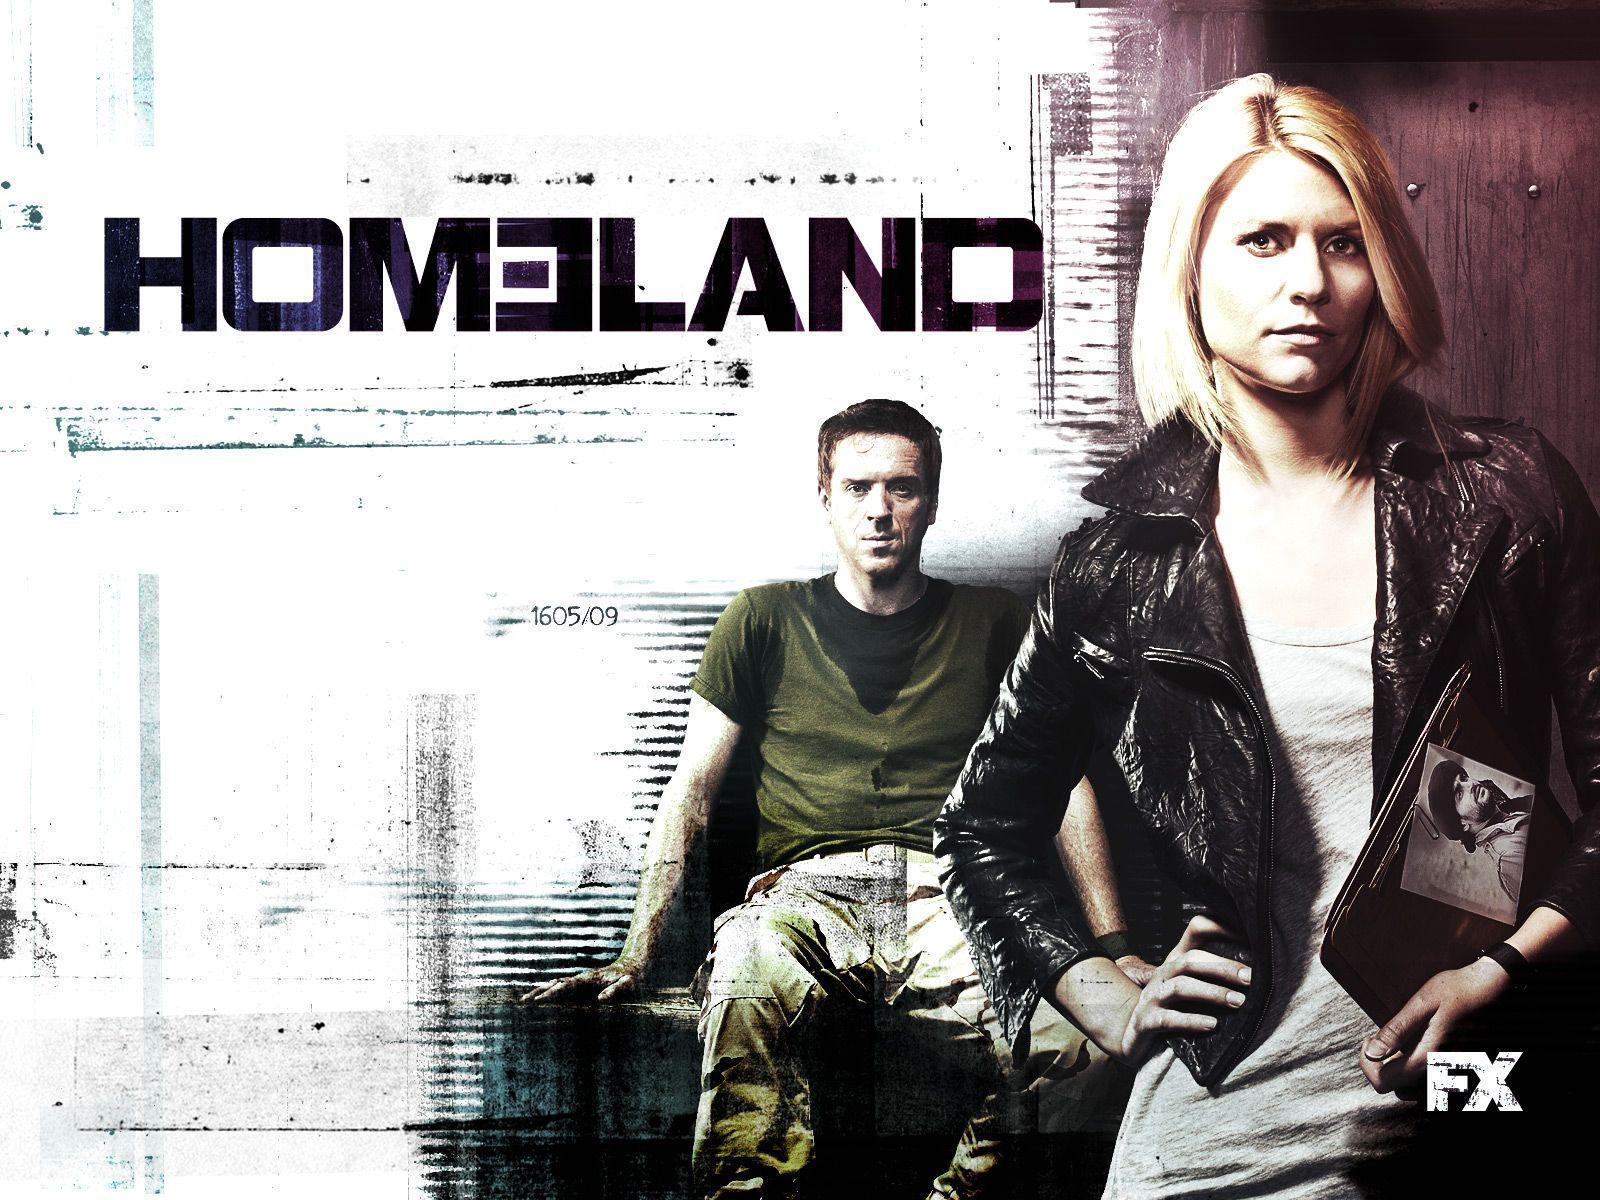 Homeland TV Wallpaper High Resolution and Quality Download